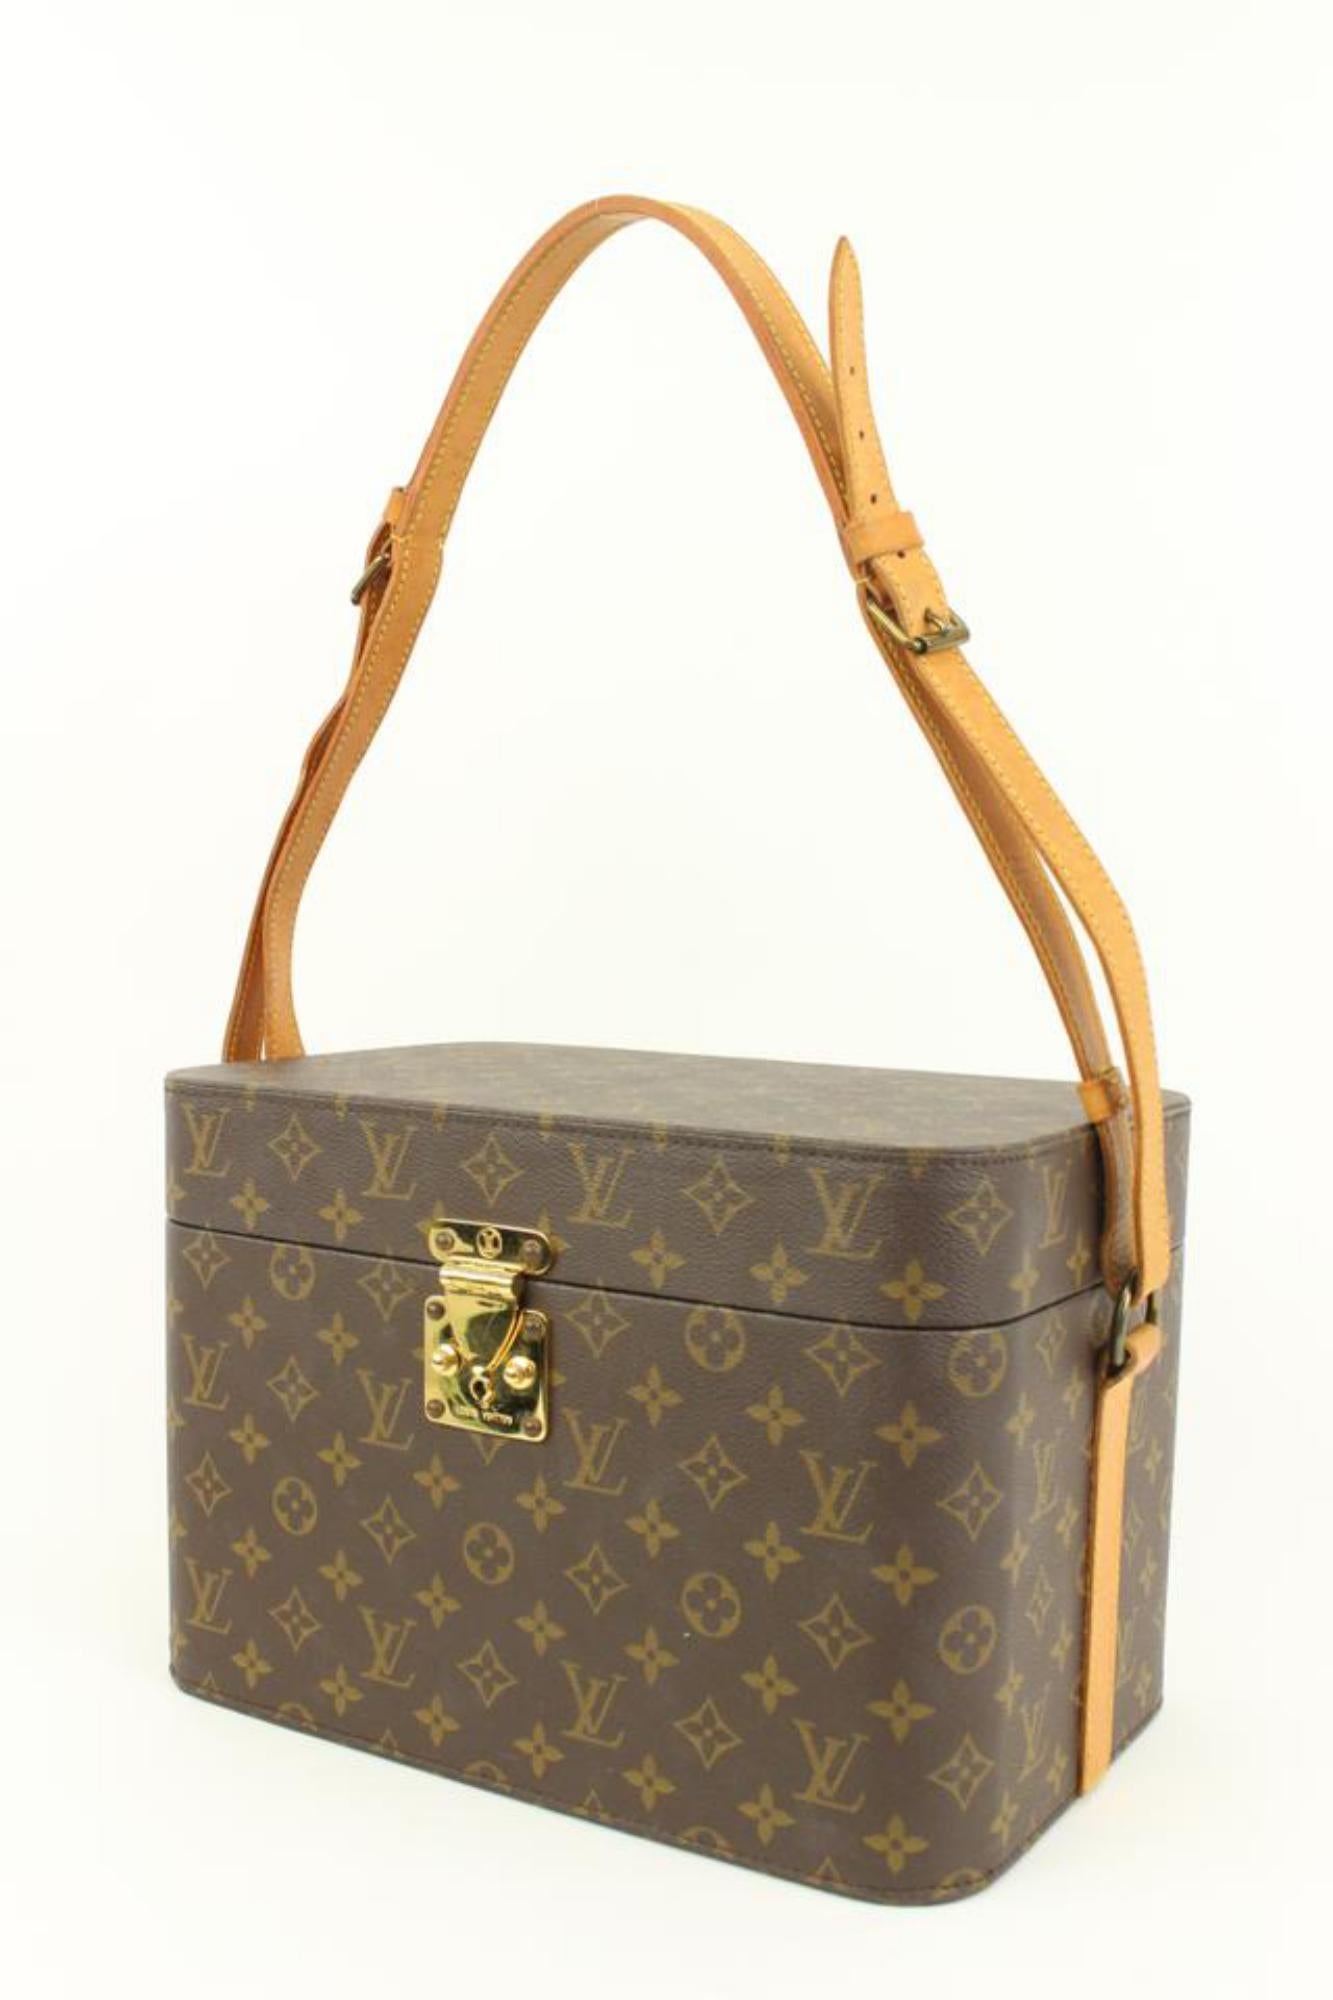 Louis Vuitton Hard Case Trunk - 2 For Sale on 1stDibs